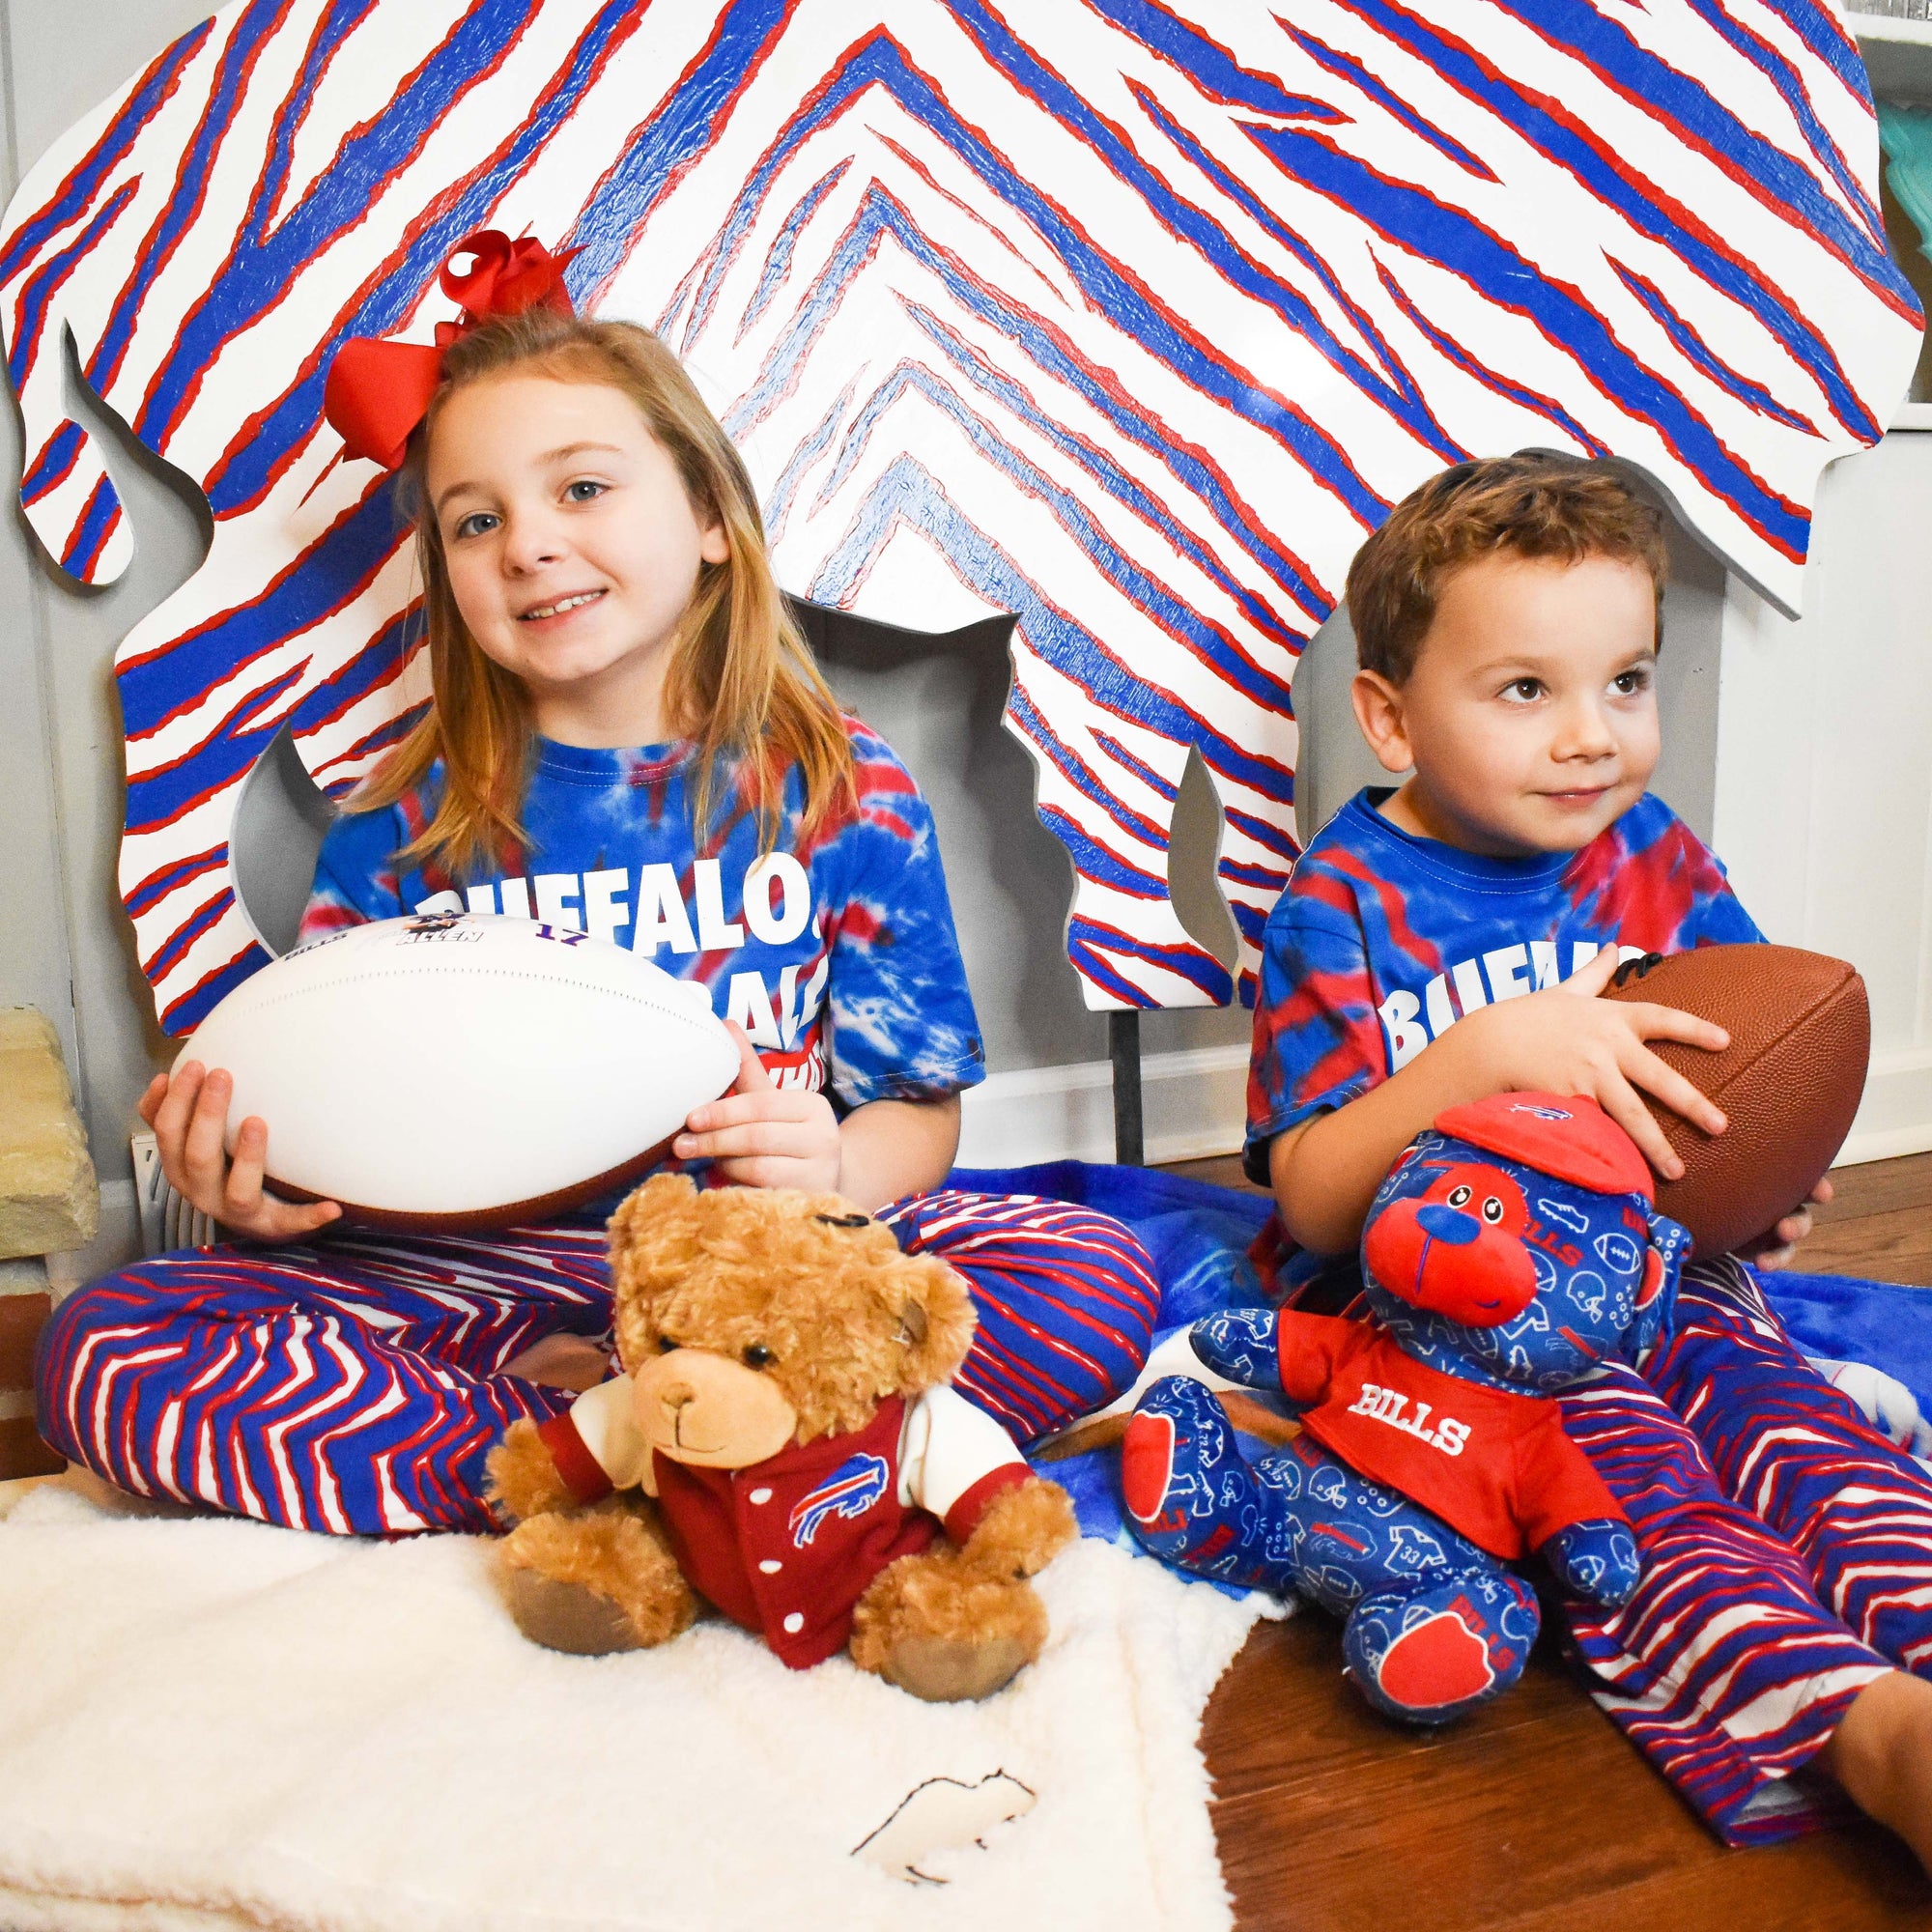 Buffalo Bills kids wearing children's Bills clothes and accessories. Shop on The BFLO website.